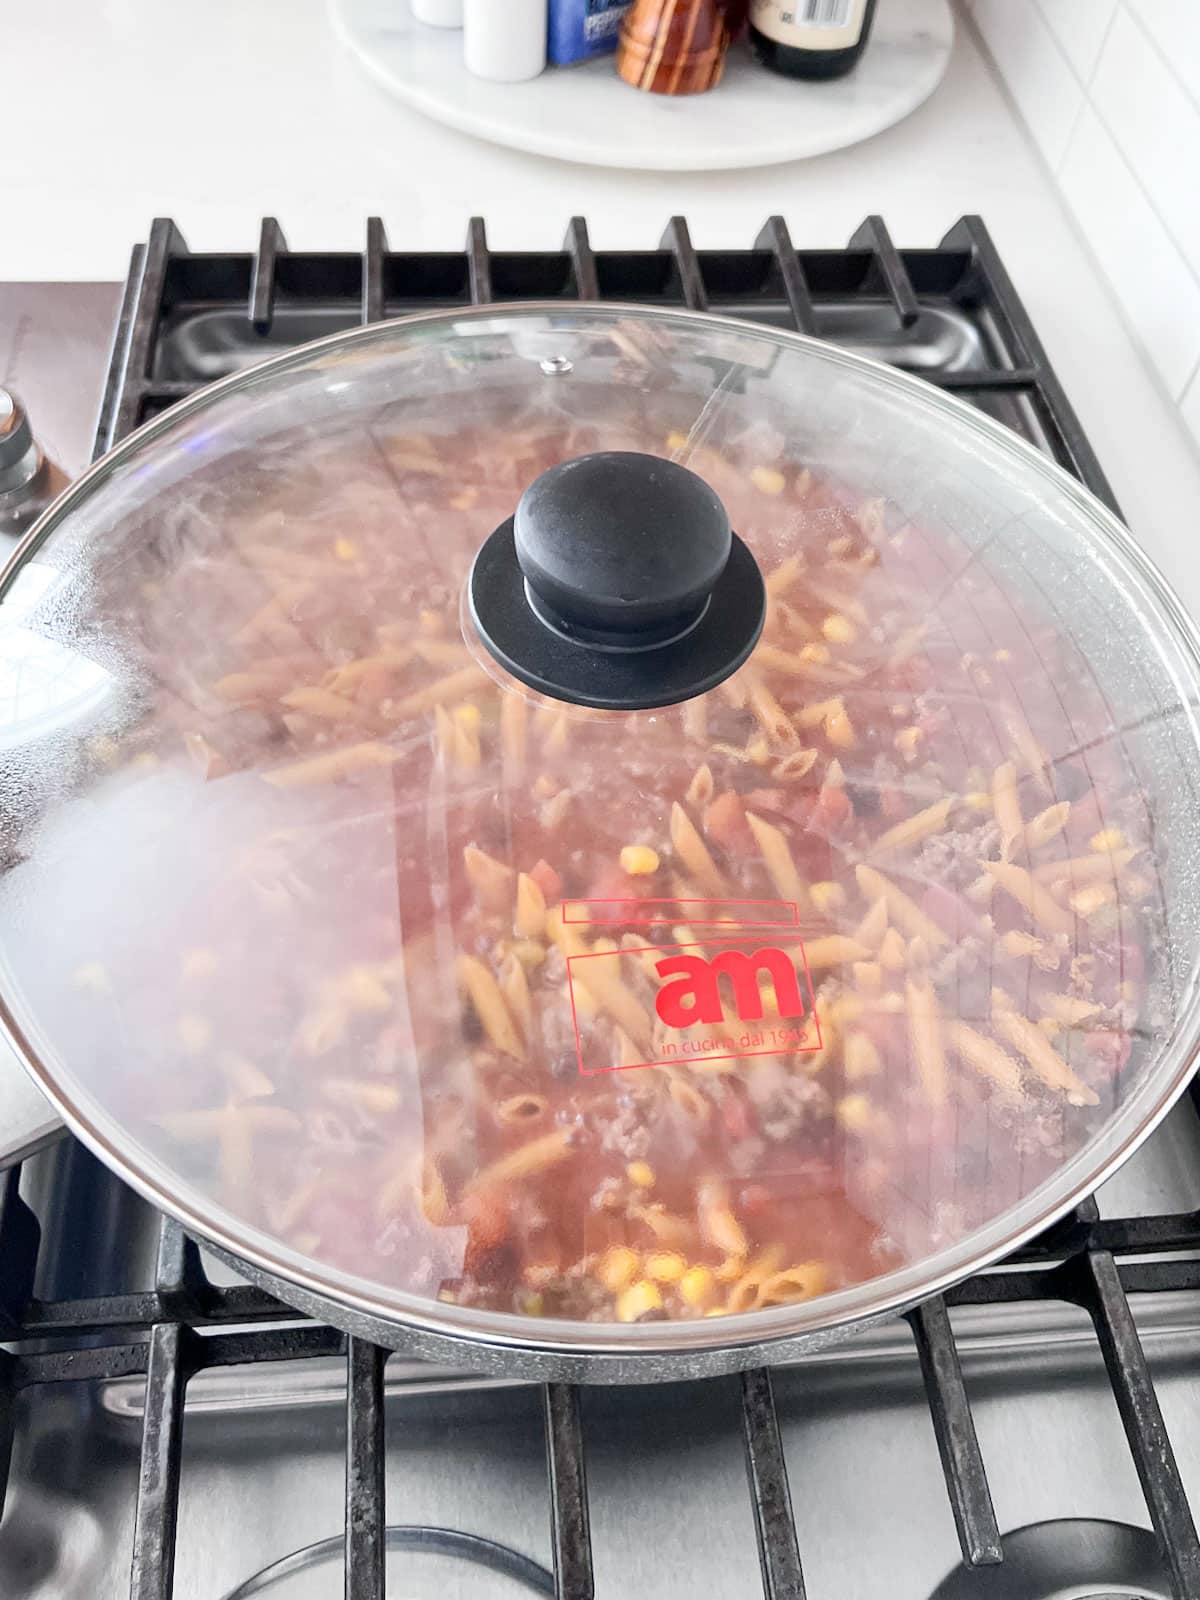 The pasta in a skillet on a stove cooking with a clear cover on it.